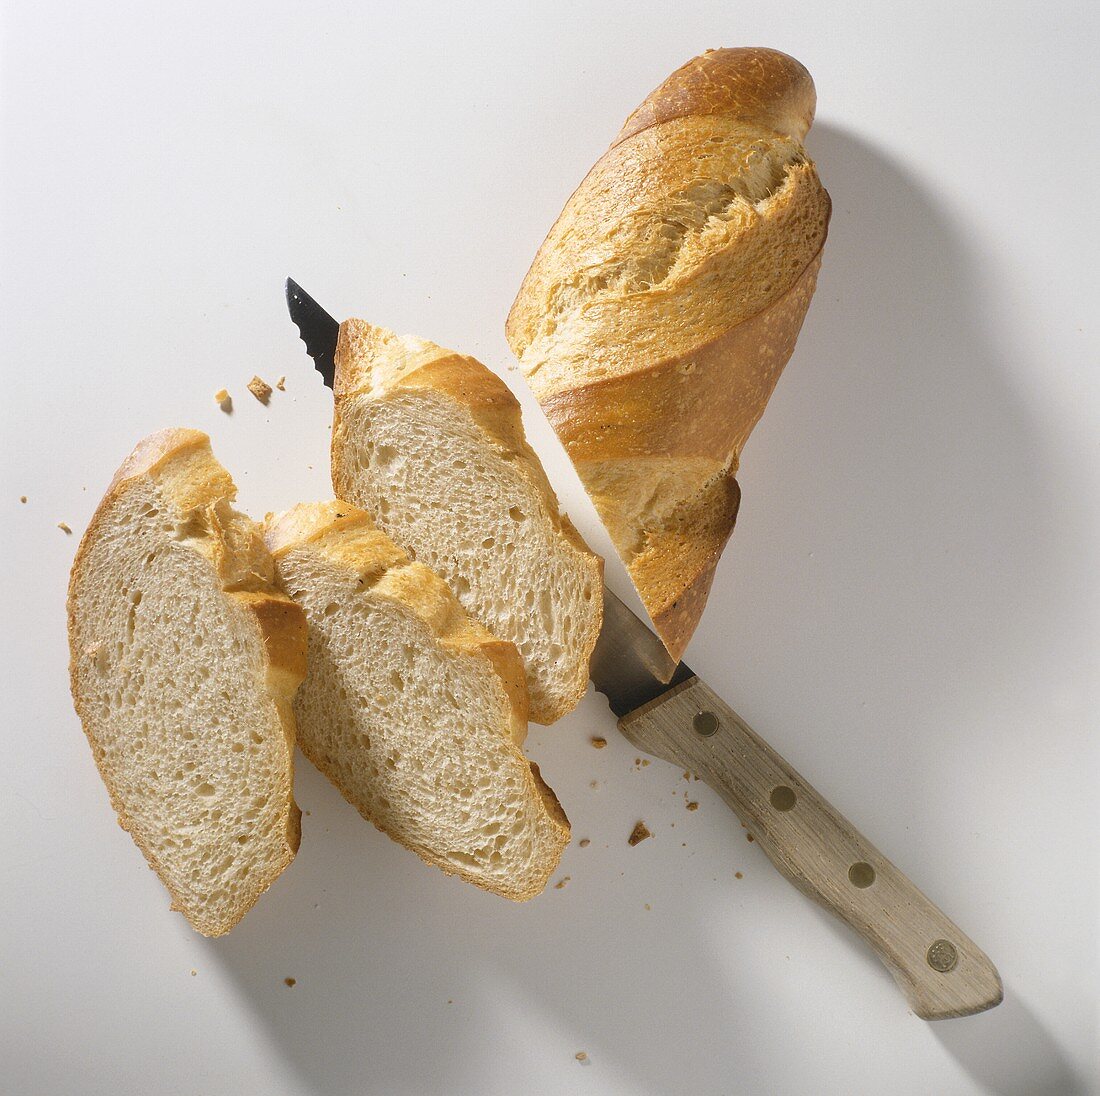 A French bread being sliced